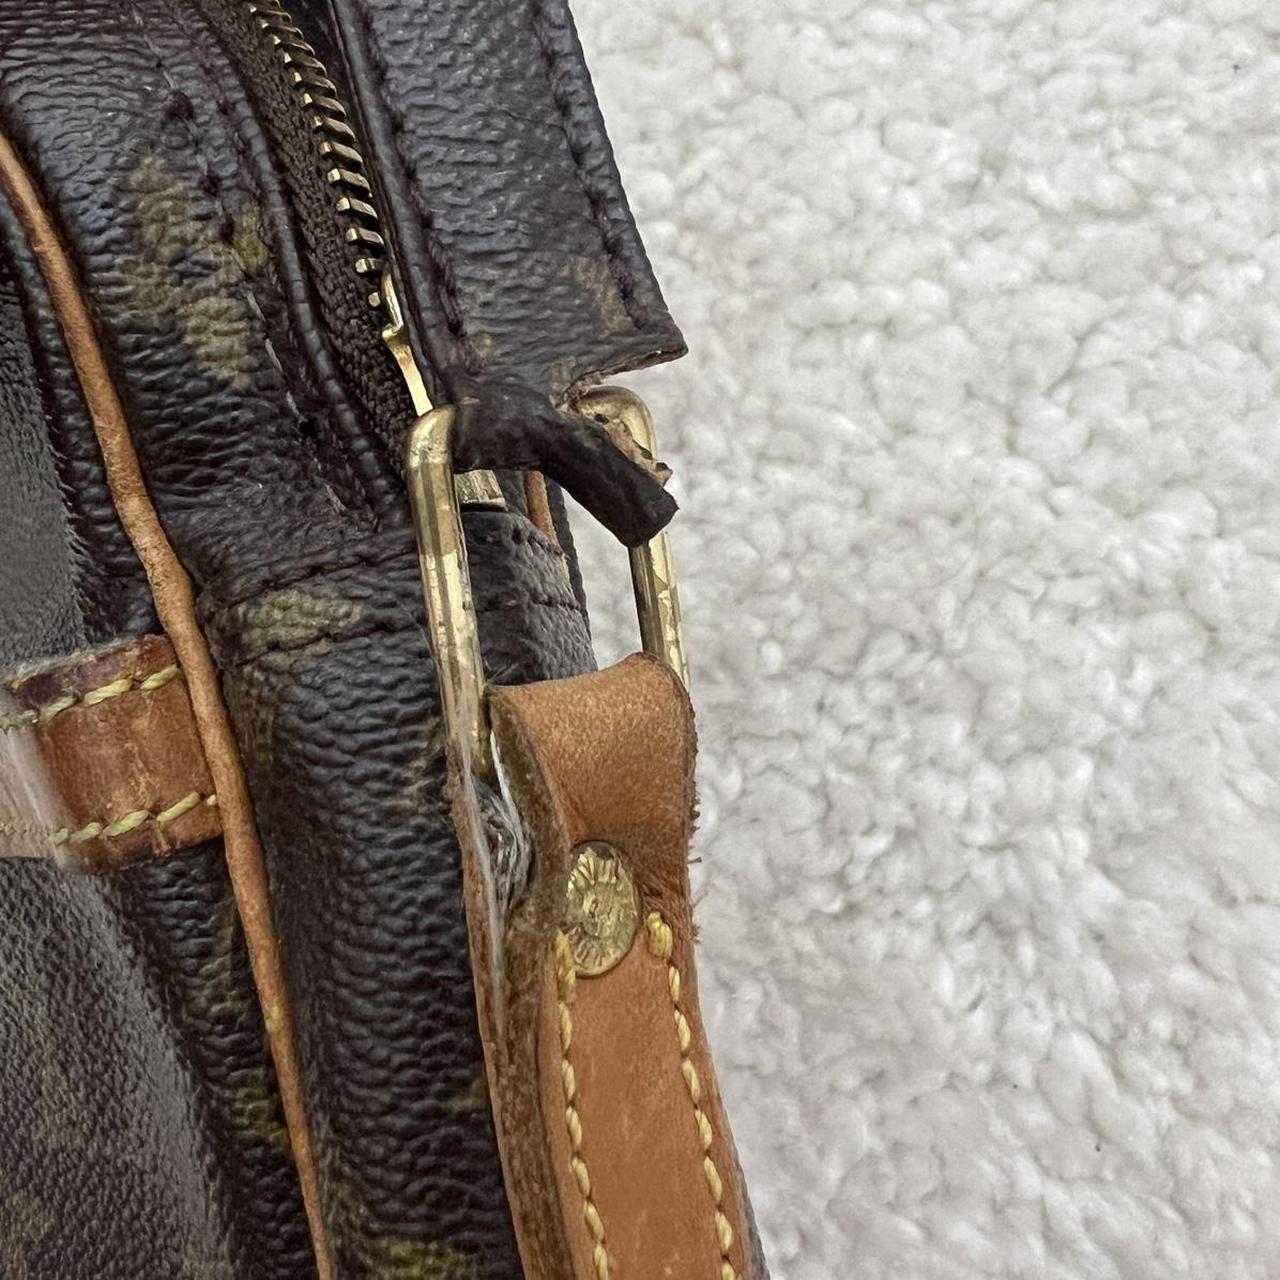 Authentic Louis Vuitton Cabas Piano tote Gently - Depop